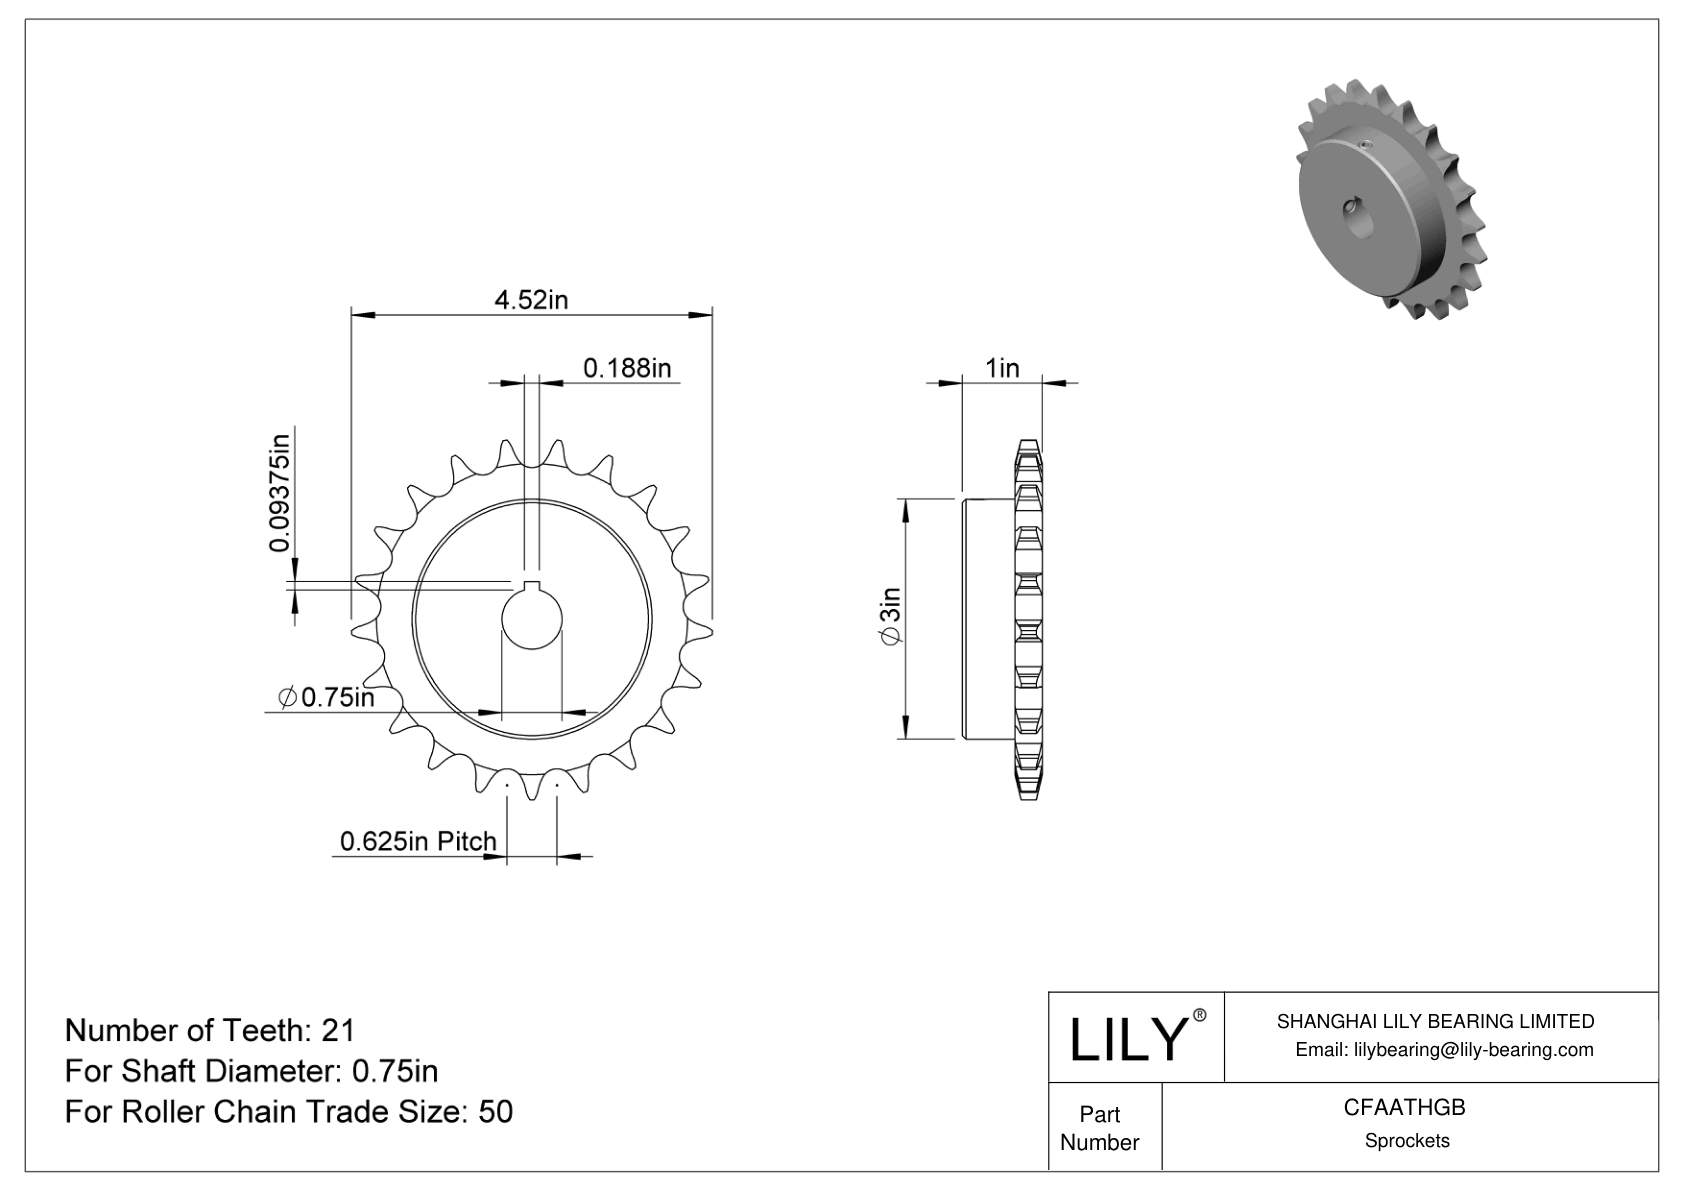 CFAATHGB Wear-Resistant Sprockets for ANSI Roller Chain cad drawing